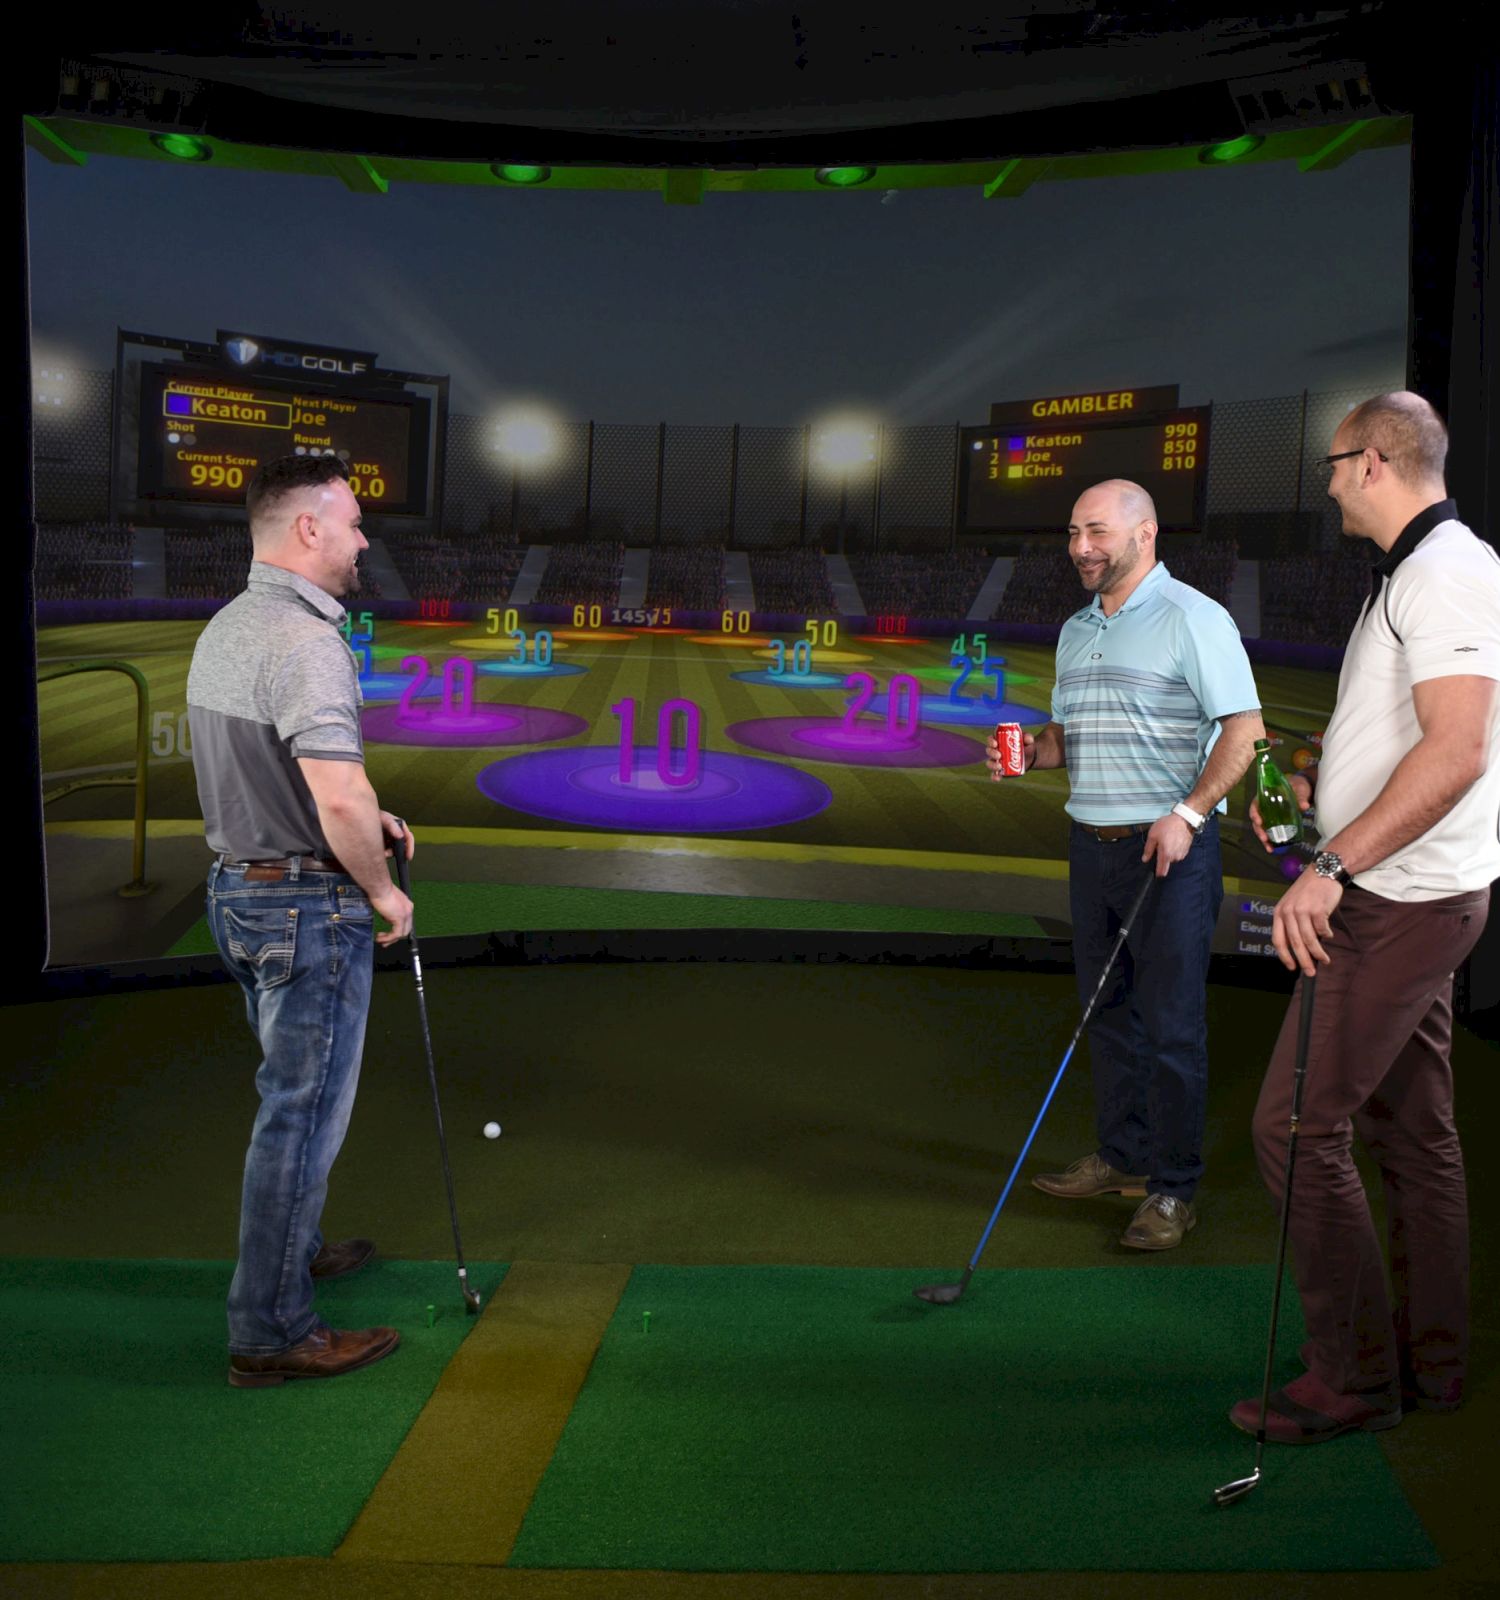 Three people are playing simulated golf in an indoor environment, standing on a green mat with golf clubs, facing an animated target screen.